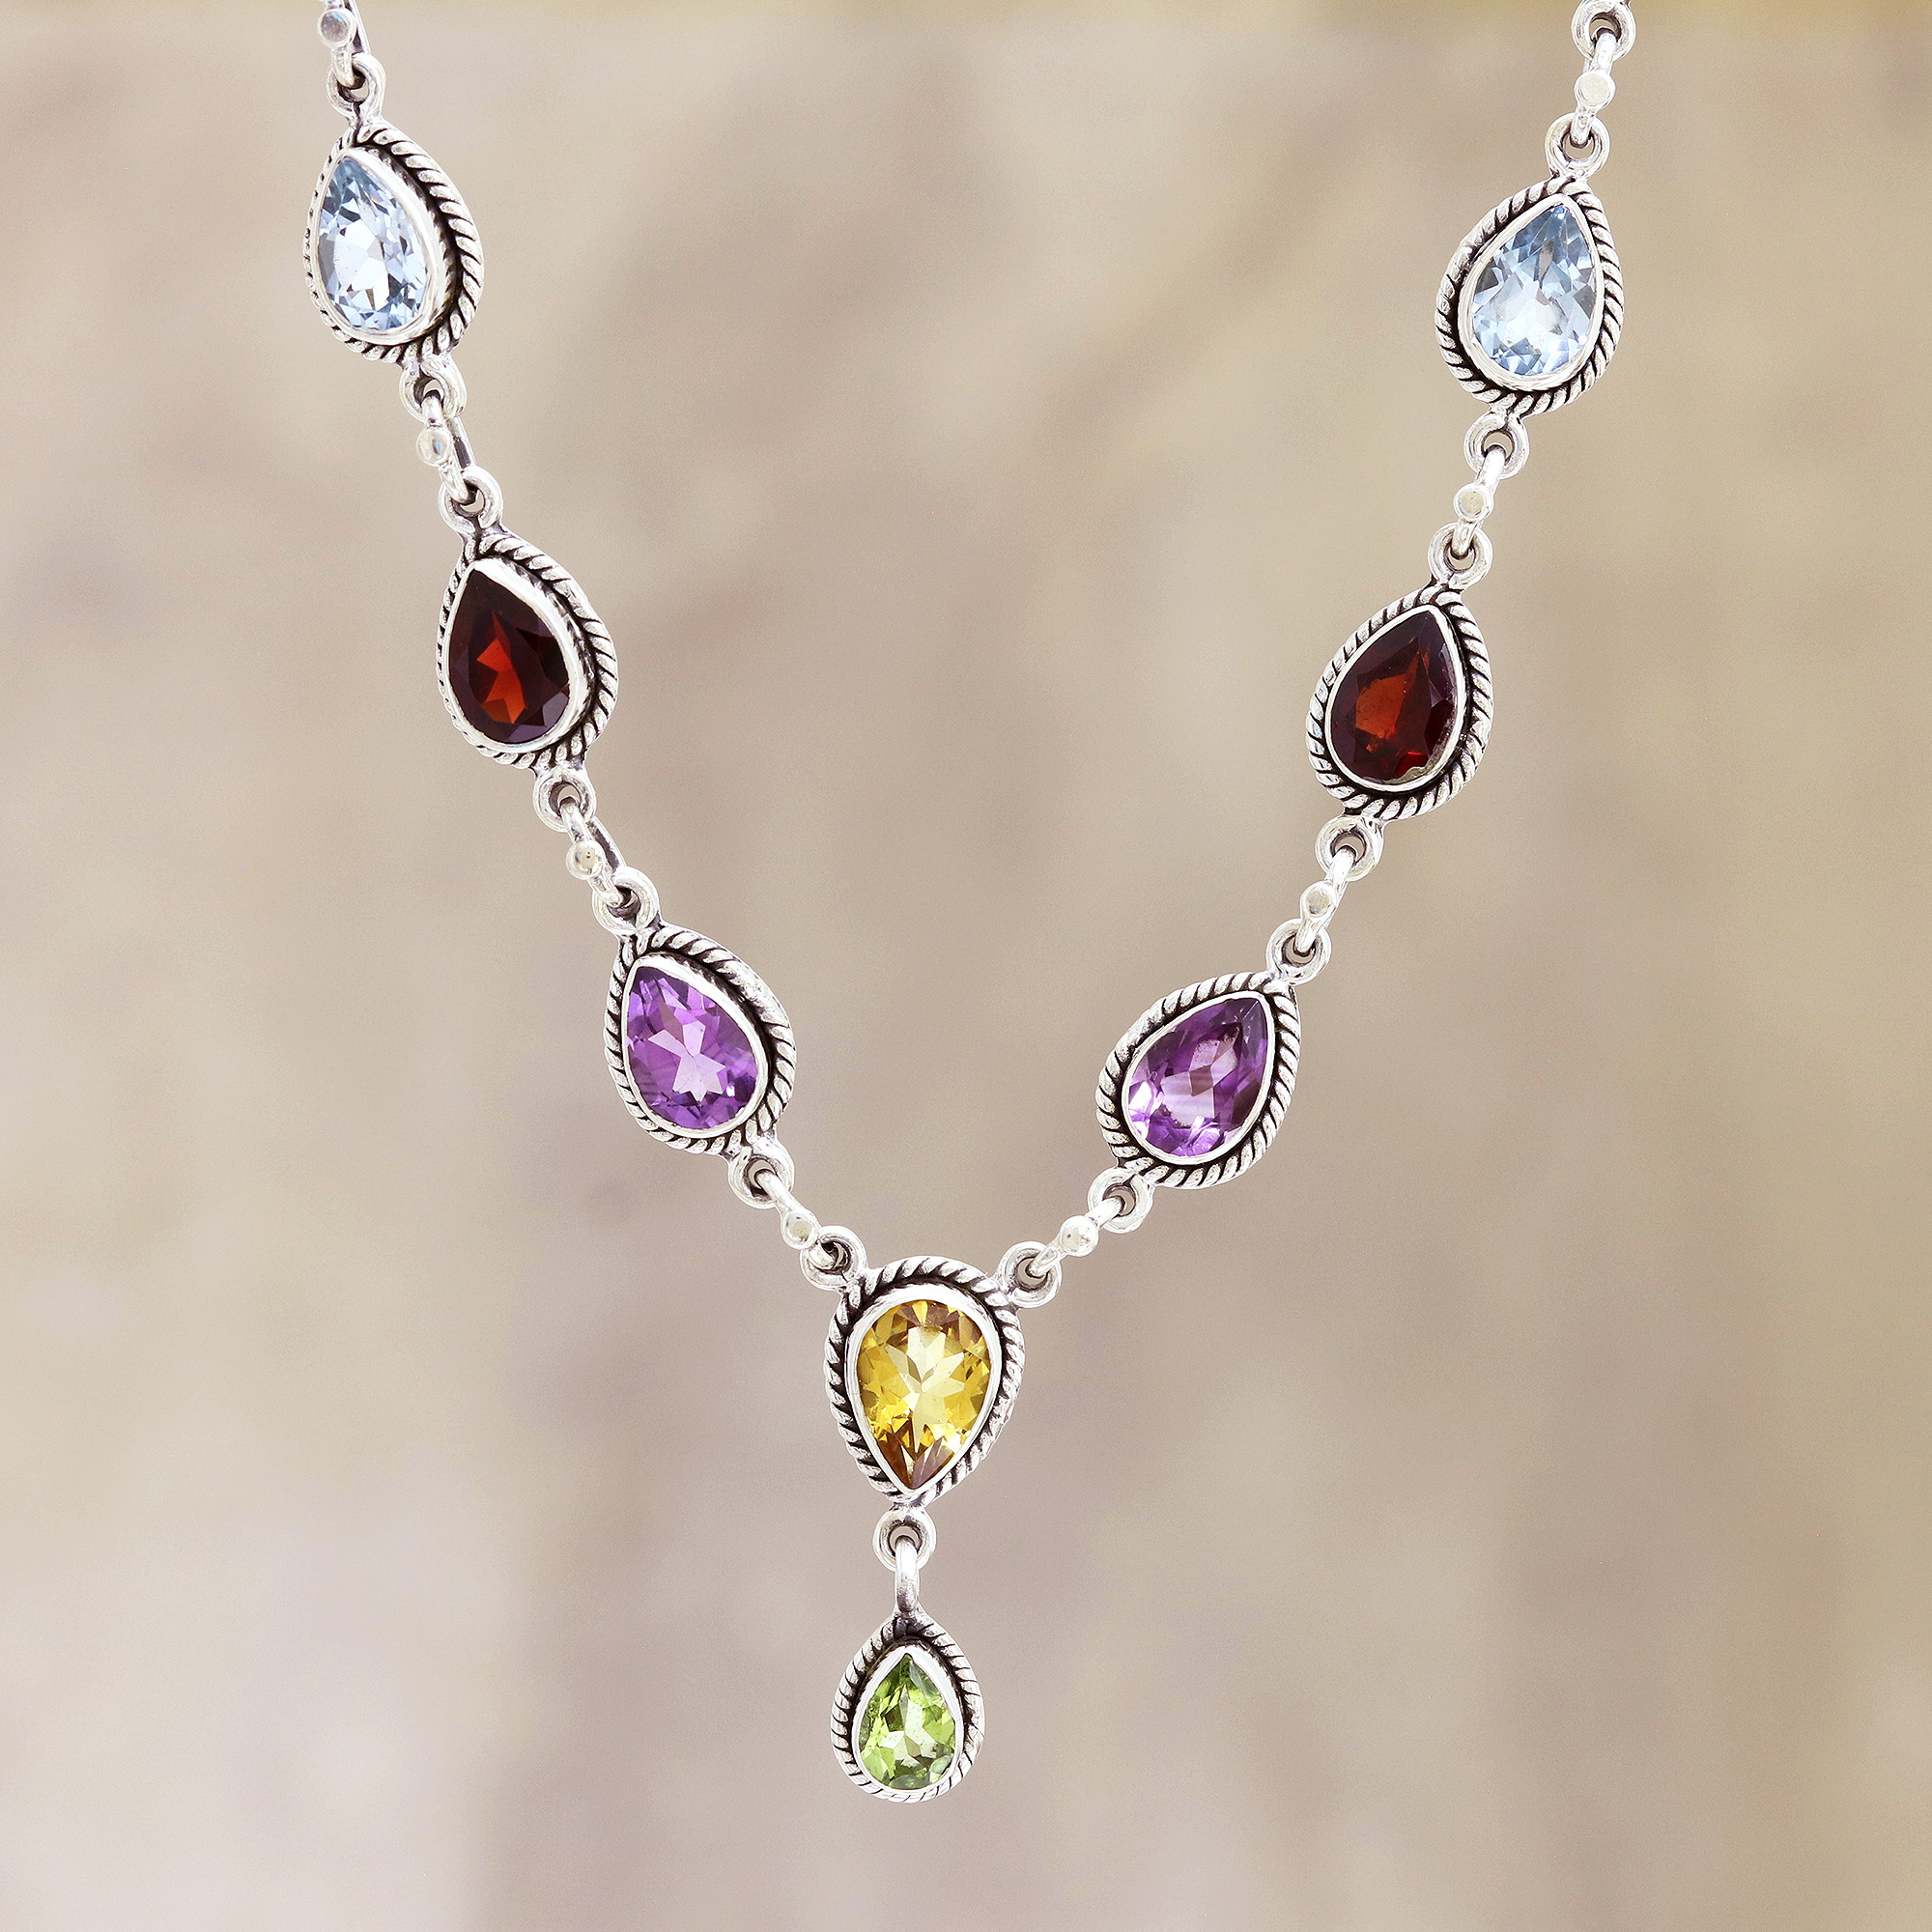 Multi-Gemstone and Sterling Silver Necklace, 'On the Bright Side'